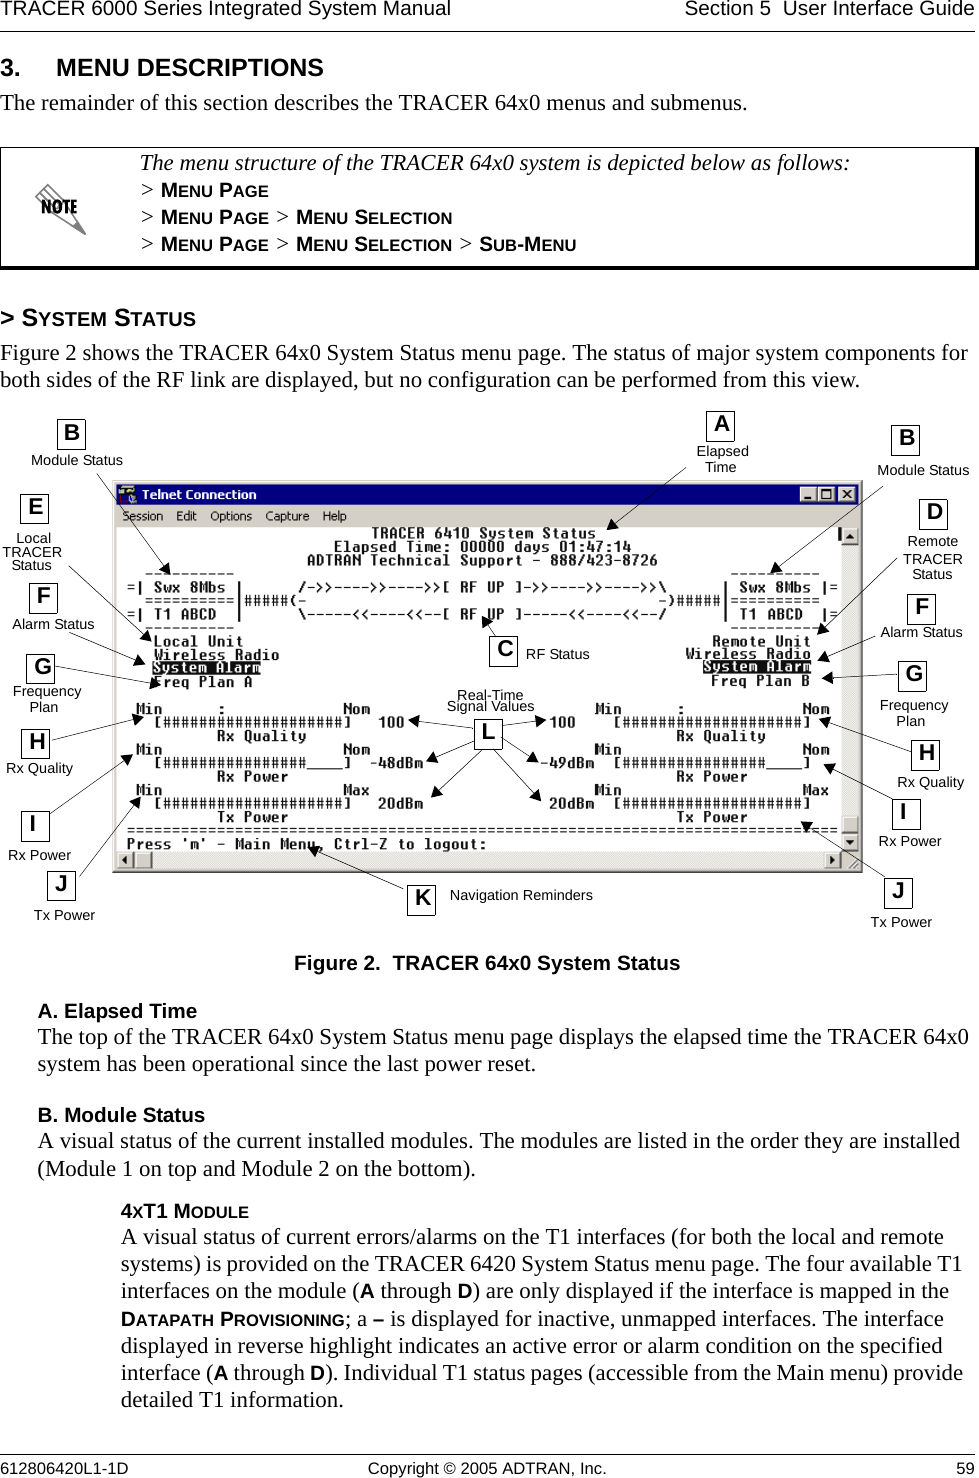 TRACER 6000 Series Integrated System Manual Section 5  User Interface Guide612806420L1-1D Copyright © 2005 ADTRAN, Inc. 593. MENU DESCRIPTIONSThe remainder of this section describes the TRACER 64x0 menus and submenus. &gt; SYSTEM STATUSFigure 2 shows the TRACER 64x0 System Status menu page. The status of major system components for both sides of the RF link are displayed, but no configuration can be performed from this view.Figure 2.  TRACER 64x0 System StatusA. Elapsed TimeThe top of the TRACER 64x0 System Status menu page displays the elapsed time the TRACER 64x0 system has been operational since the last power reset.B. Module StatusA visual status of the current installed modules. The modules are listed in the order they are installed (Module 1 on top and Module 2 on the bottom).The menu structure of the TRACER 64x0 system is depicted below as follows: &gt; MENU PAGE &gt; MENU PAGE &gt; MENU SELECTION &gt; MENU PAGE &gt; MENU SELECTION &gt; SUB-MENU4XT1 MODULE A visual status of current errors/alarms on the T1 interfaces (for both the local and remote systems) is provided on the TRACER 6420 System Status menu page. The four available T1 interfaces on the module (A through D) are only displayed if the interface is mapped in the DATAPATH PROVISIONING; a – is displayed for inactive, unmapped interfaces. The interface displayed in reverse highlight indicates an active error or alarm condition on the specified interface (A through D). Individual T1 status pages (accessible from the Main menu) provide detailed T1 information.AElapsedTimeEGCRF StatusDRemoteGIRx PowerJTx PowerJTx Power KNavigation RemindersTRACERPlan FrequencyPlanStatusHModule StatusBLocalFrequencyIRx PowerModule StatusStatus TRACERRx QualityRx QualityBLReal-TimeSignal ValuesFAlarm Status FAlarm StatusH